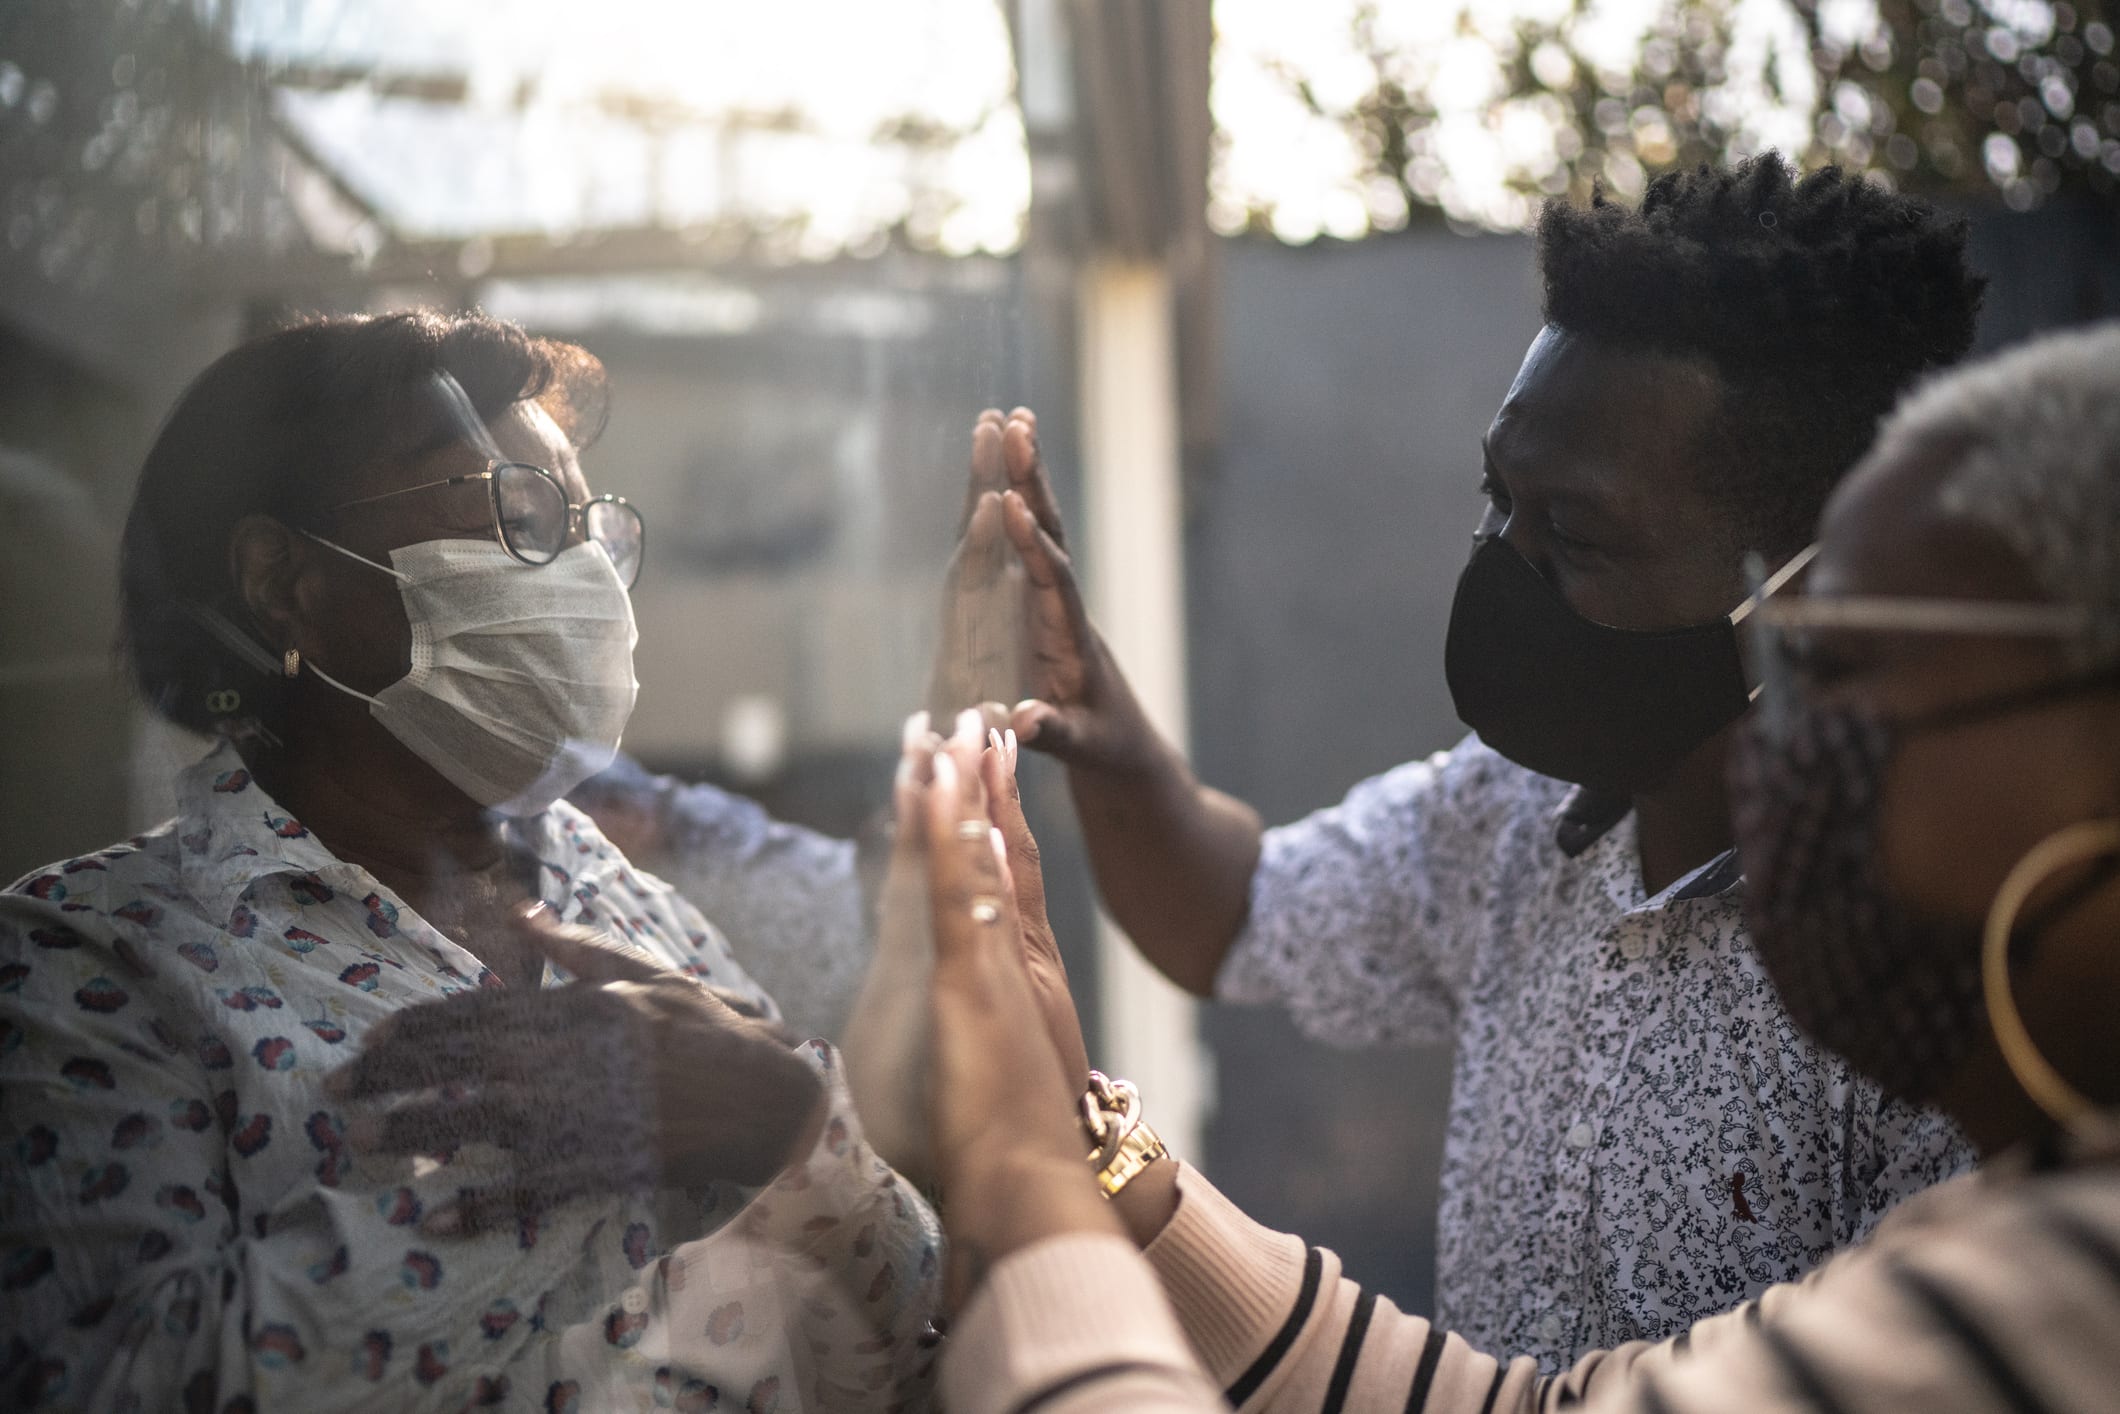 Navigating Personal Boundaries With Family During the Pandemic